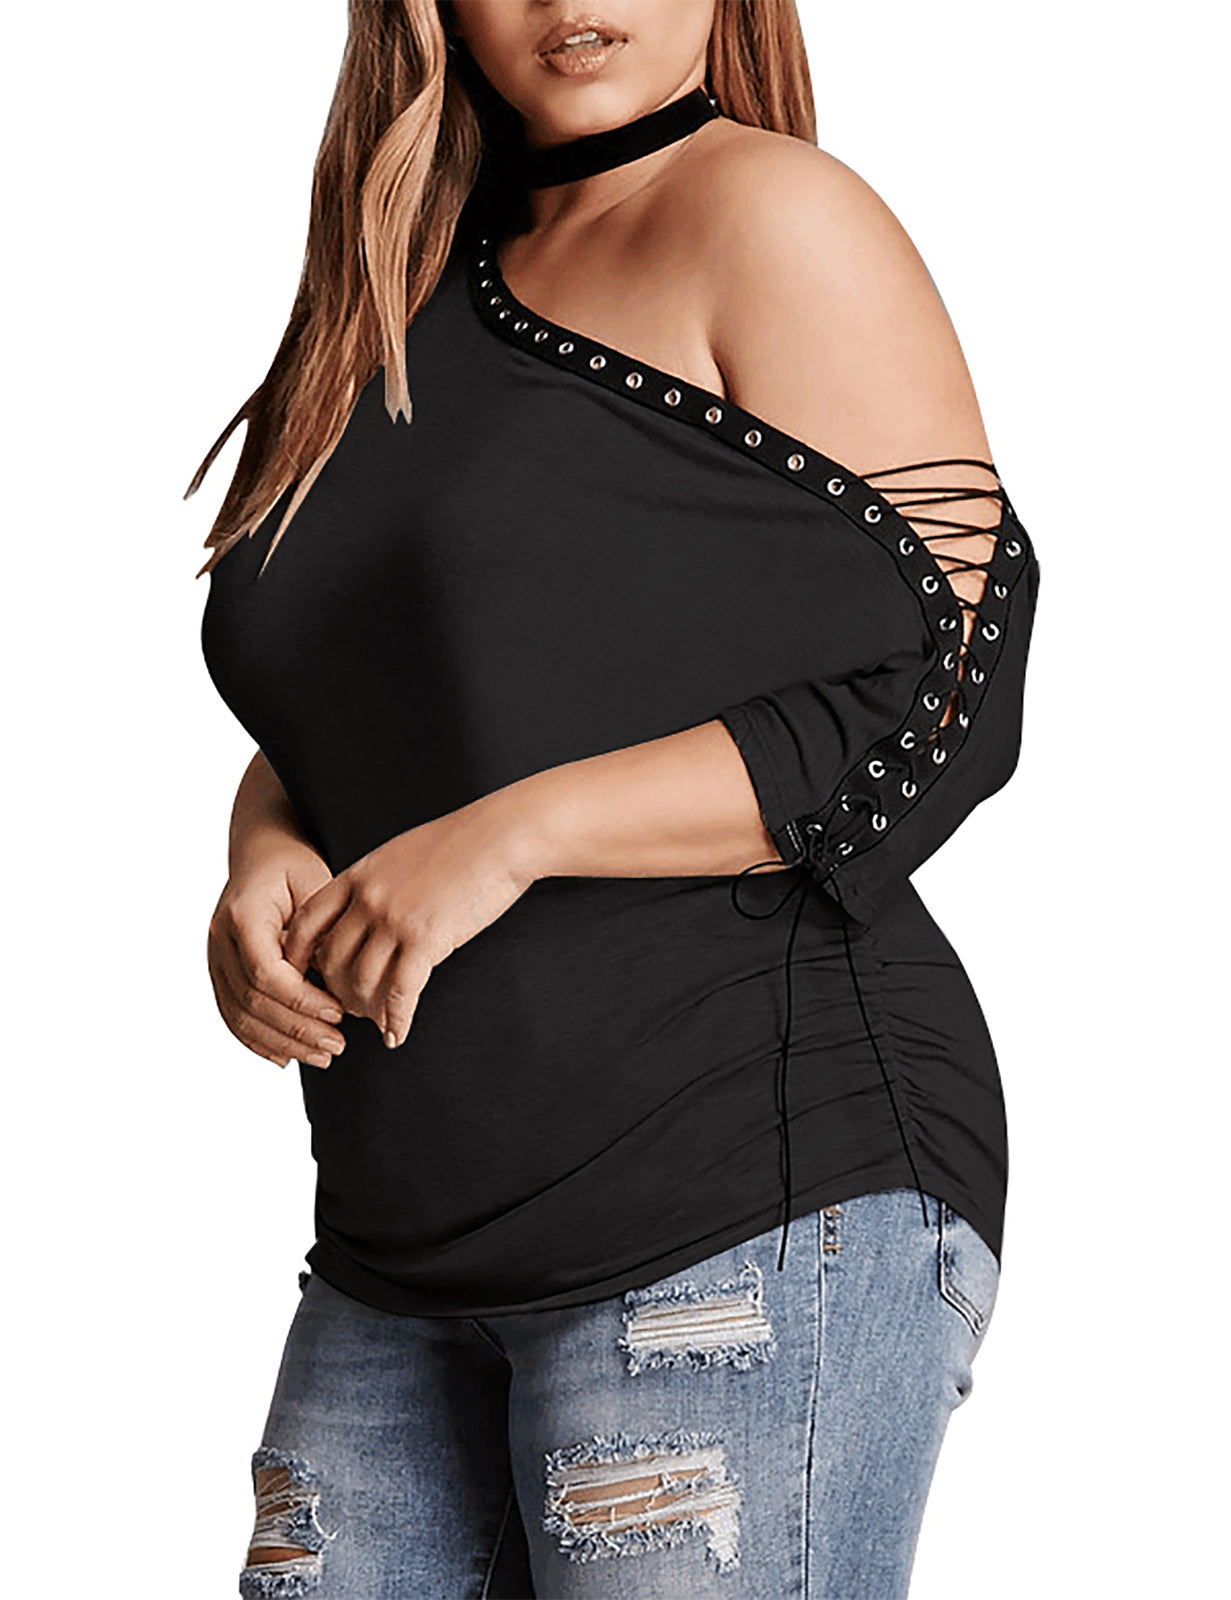 (Buy 1 Get 1 FREE) Plus Size Off Shoulder Top + Plus Size Lingerie (Pack of 2)